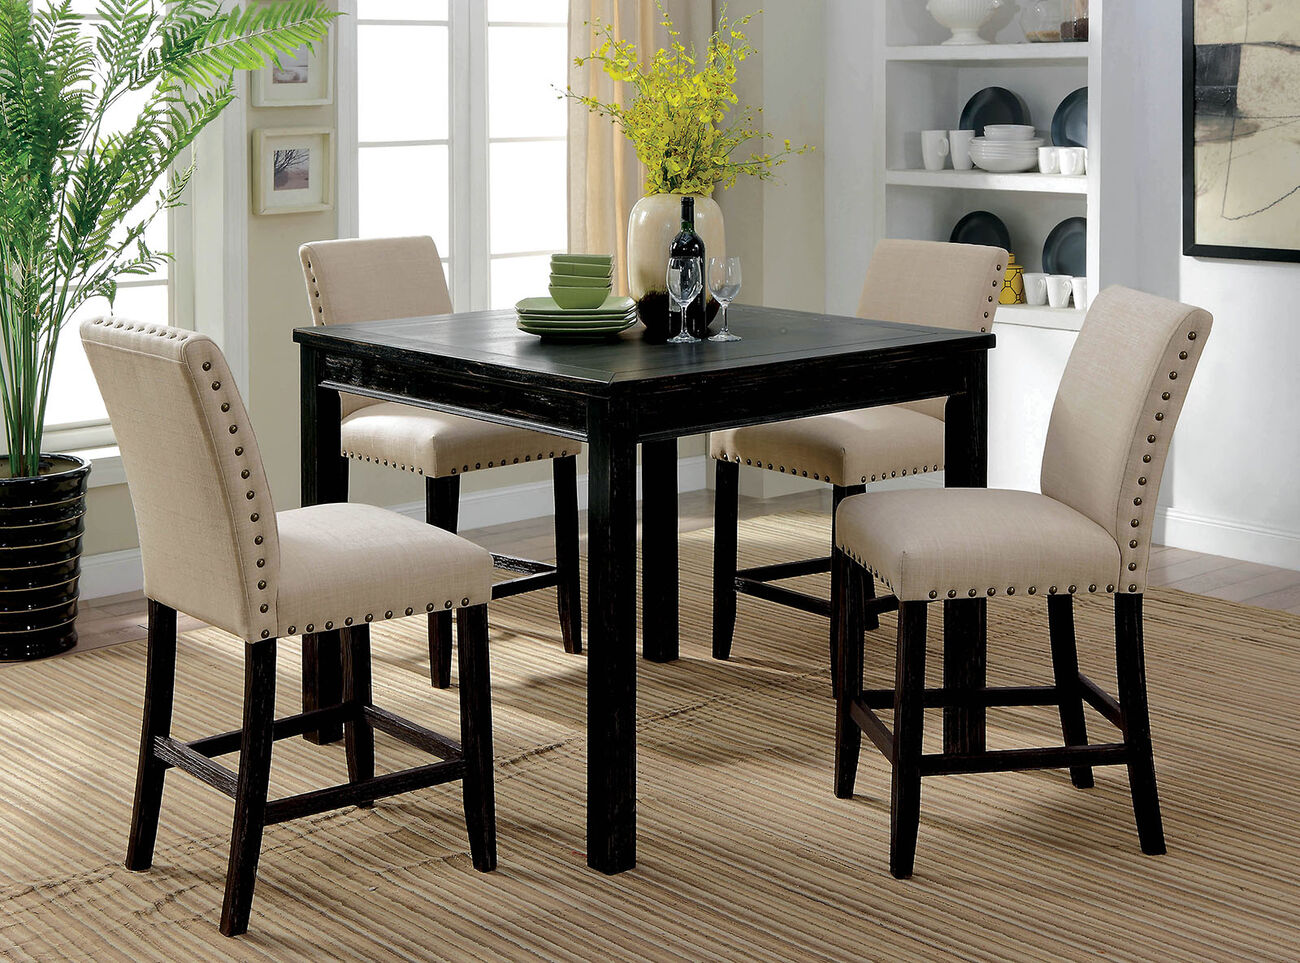 5-Piece Wooden Counter Height Table Set In Antique Black And Beige